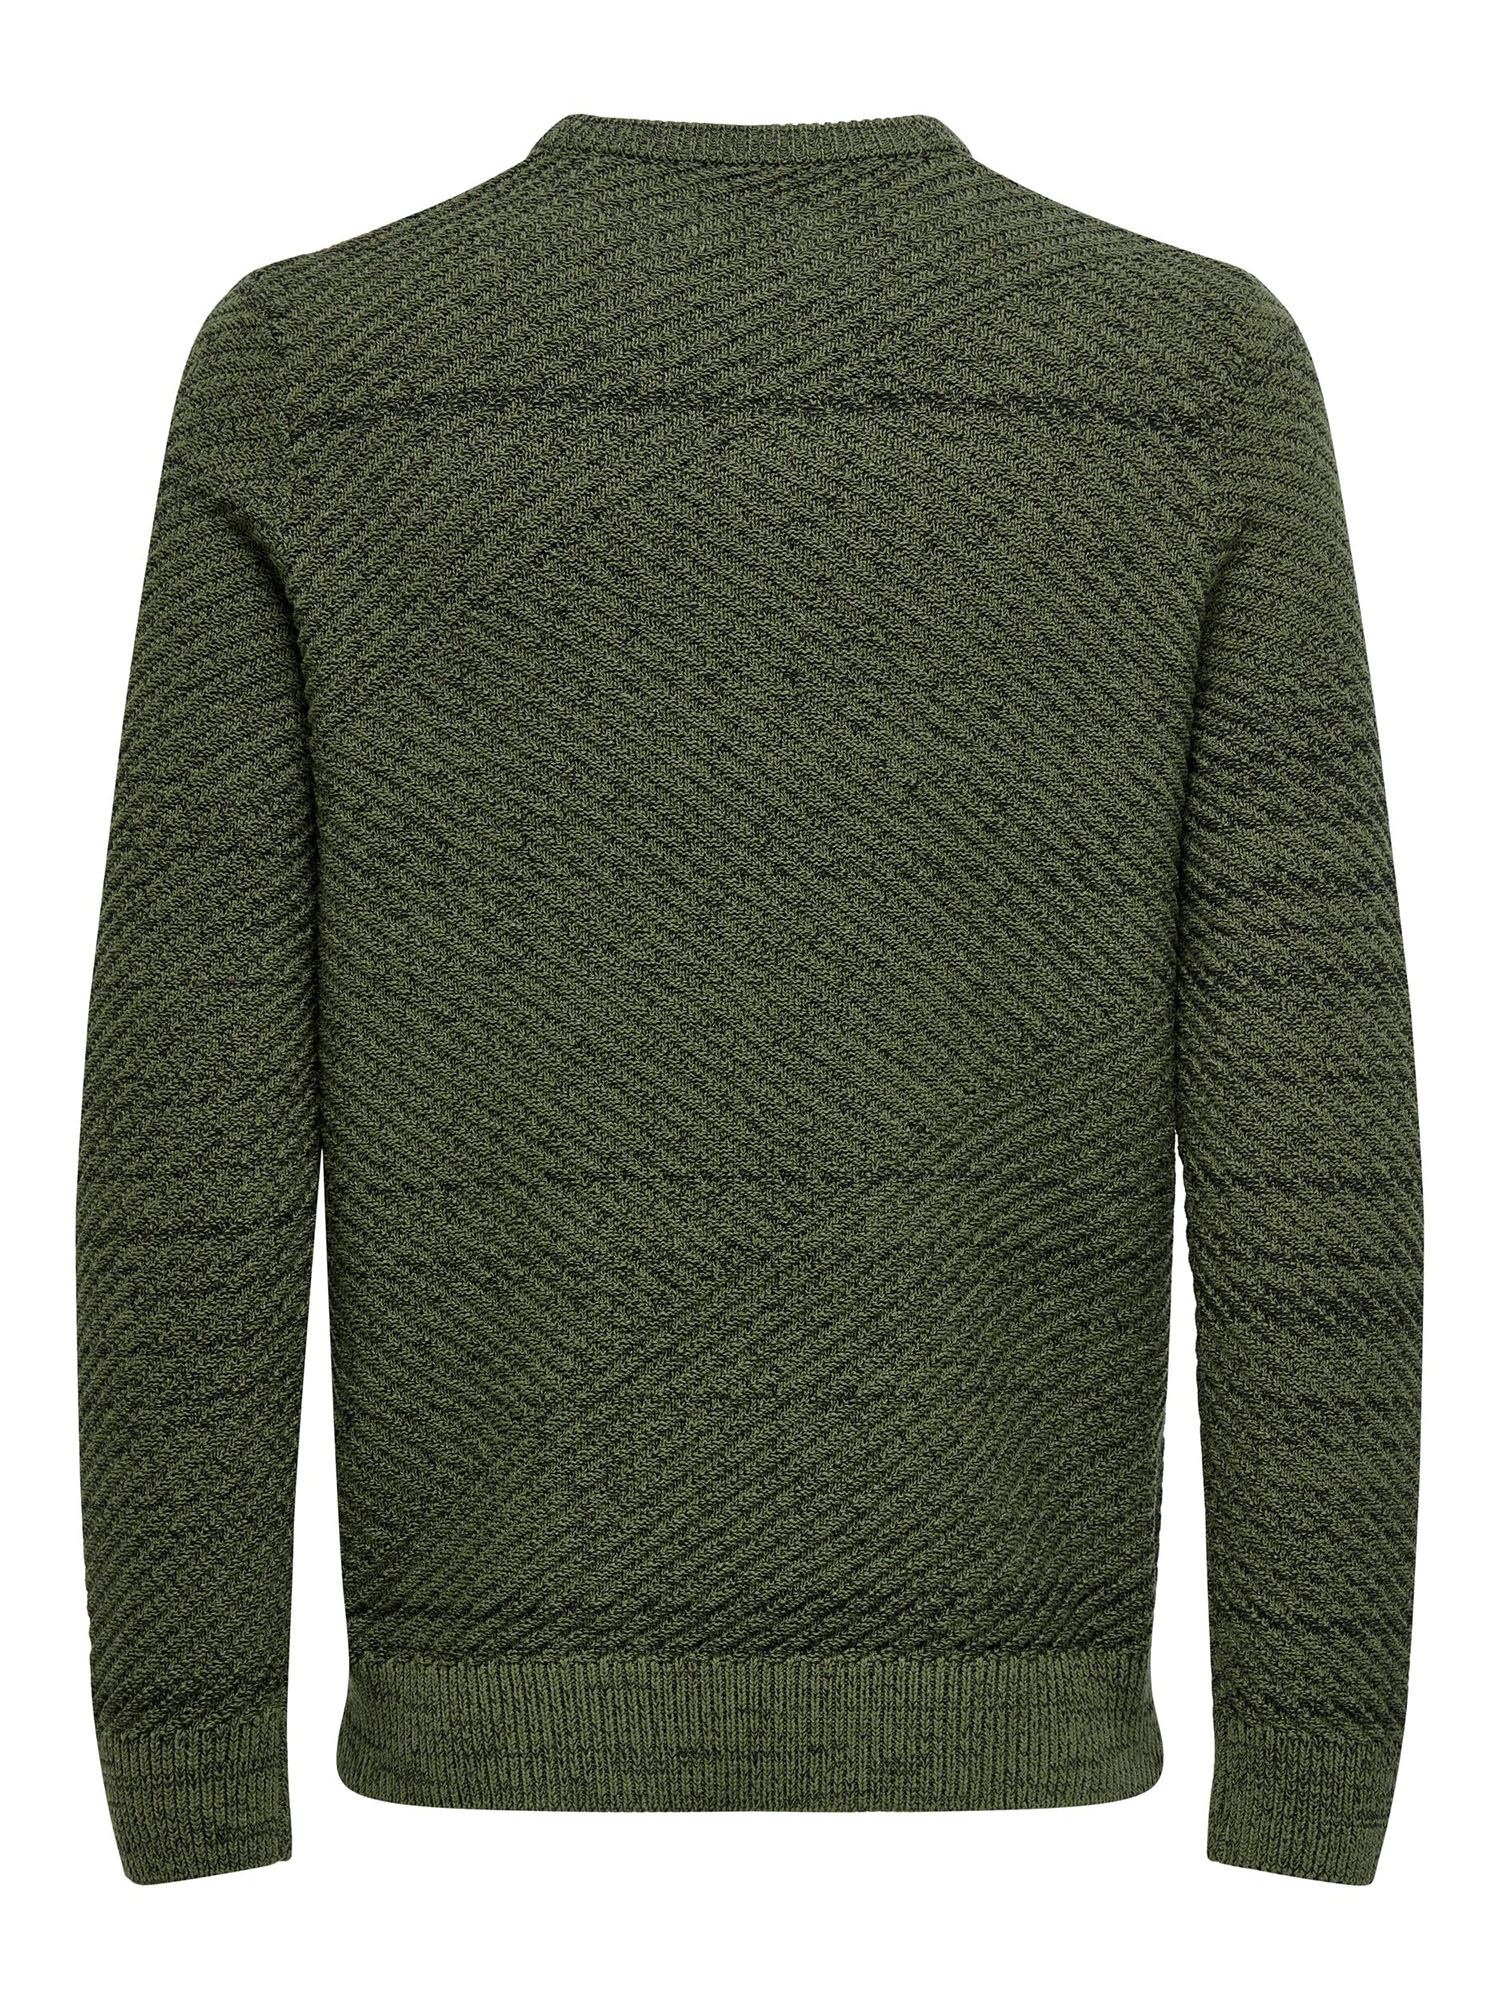 ONLY&SONS MAURUS - VERDE